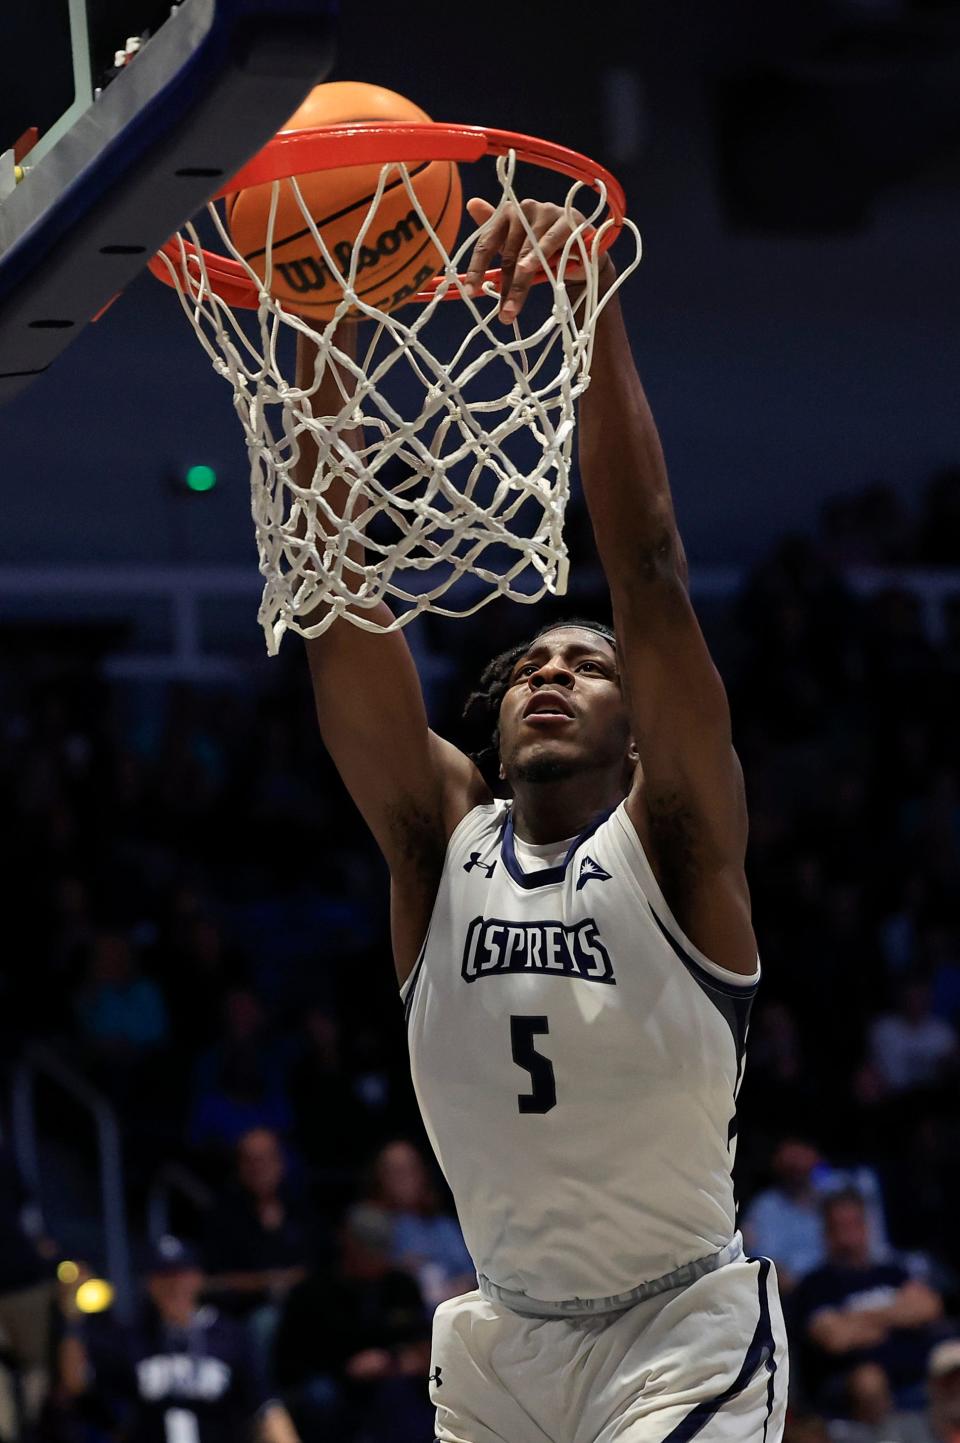 Dorian James of the University of North Florida dunks the ball for two of his career-high 25 points in the Ospreys' 82-74 victory over Jacksonville University on Jan. 12.